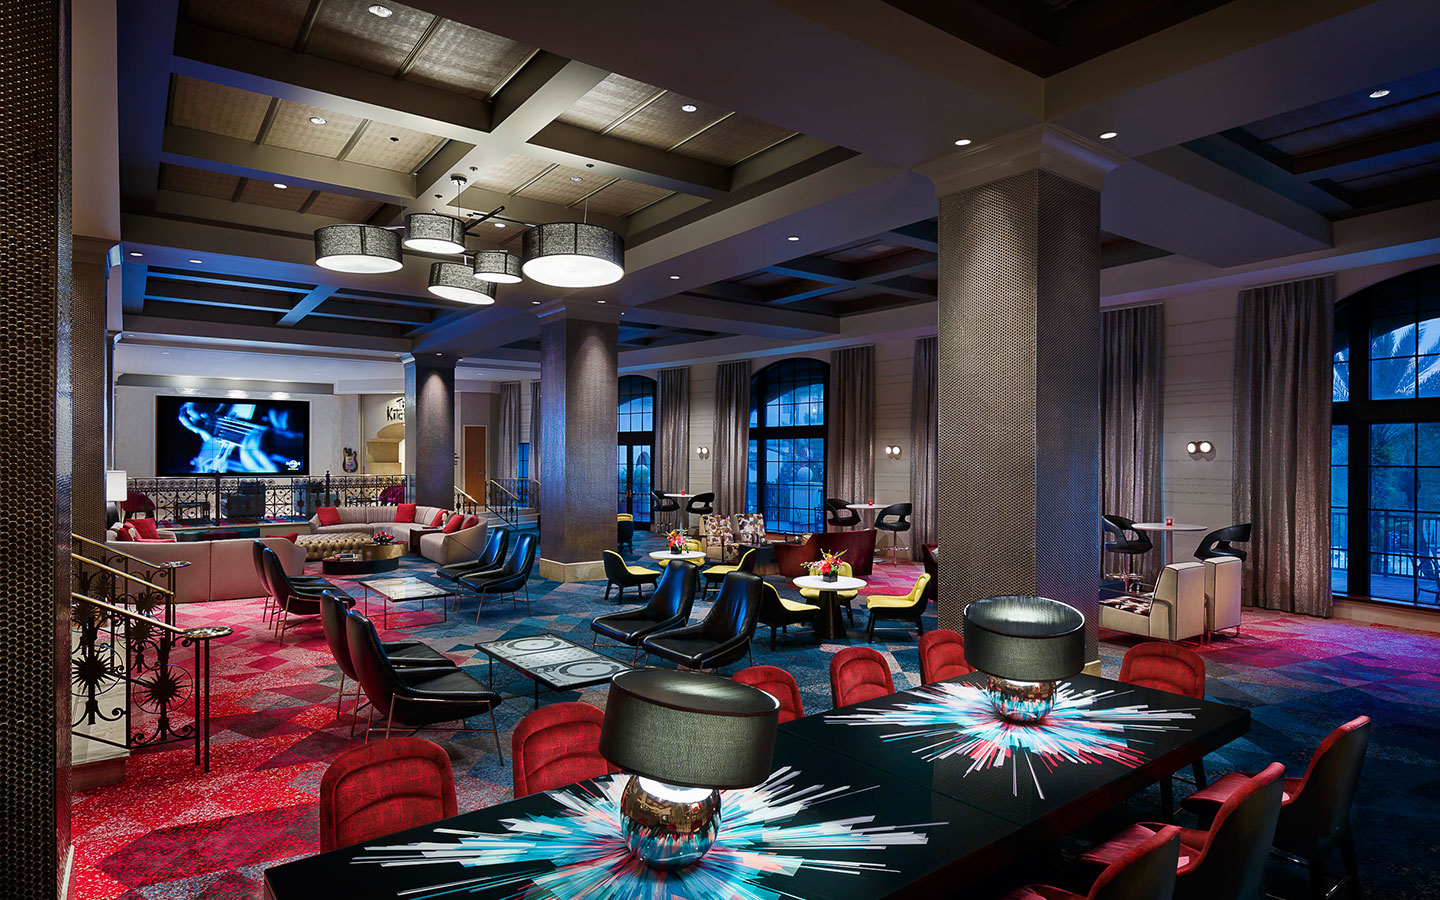 Take center stage at the hard rock hotel at universal orlando ™. 